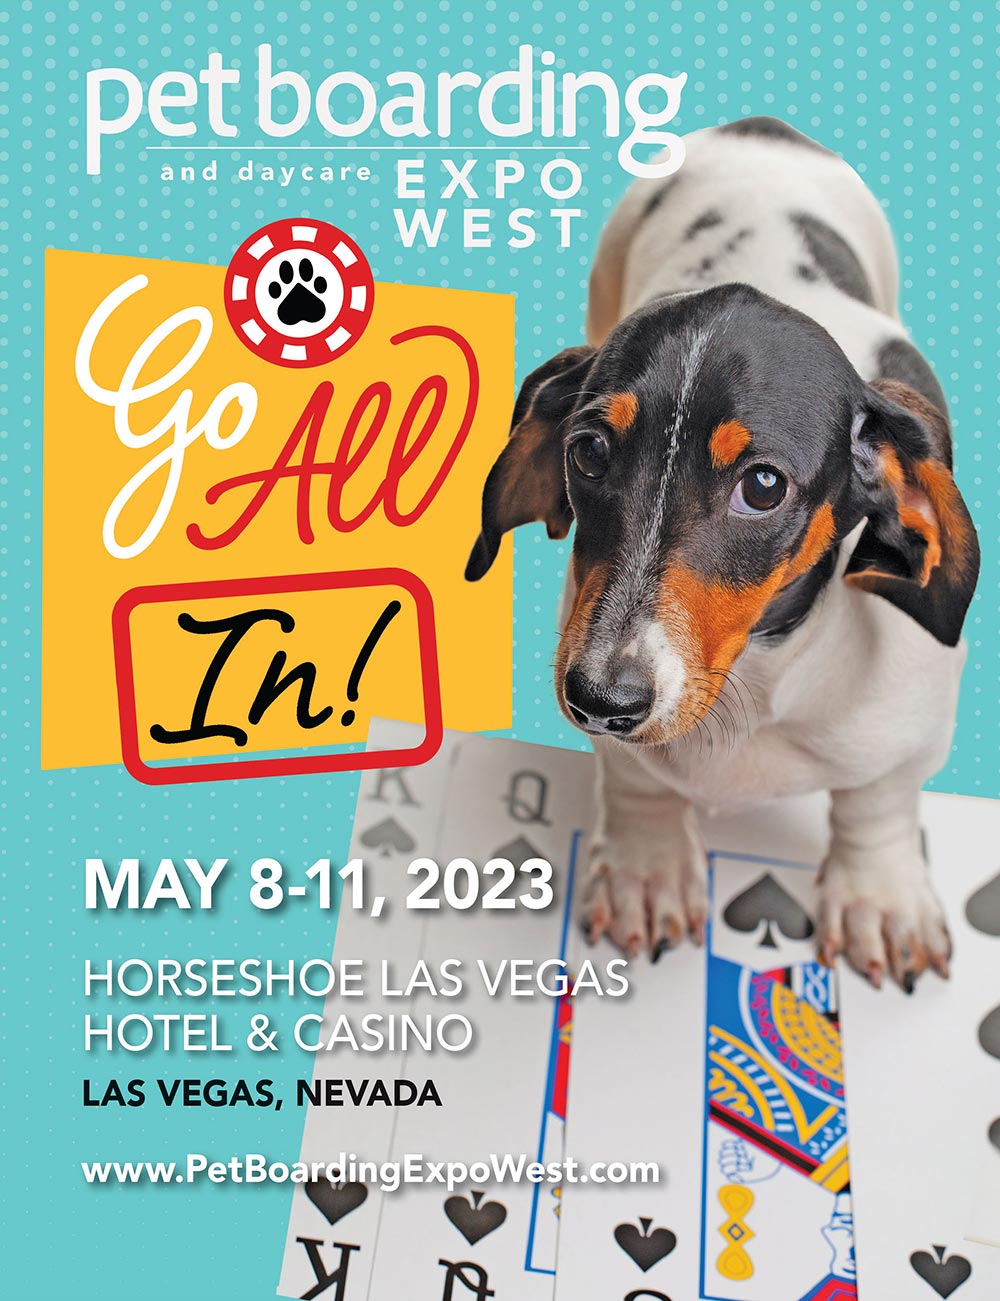 Pet Boarding and Daycare Expo West Advertisement